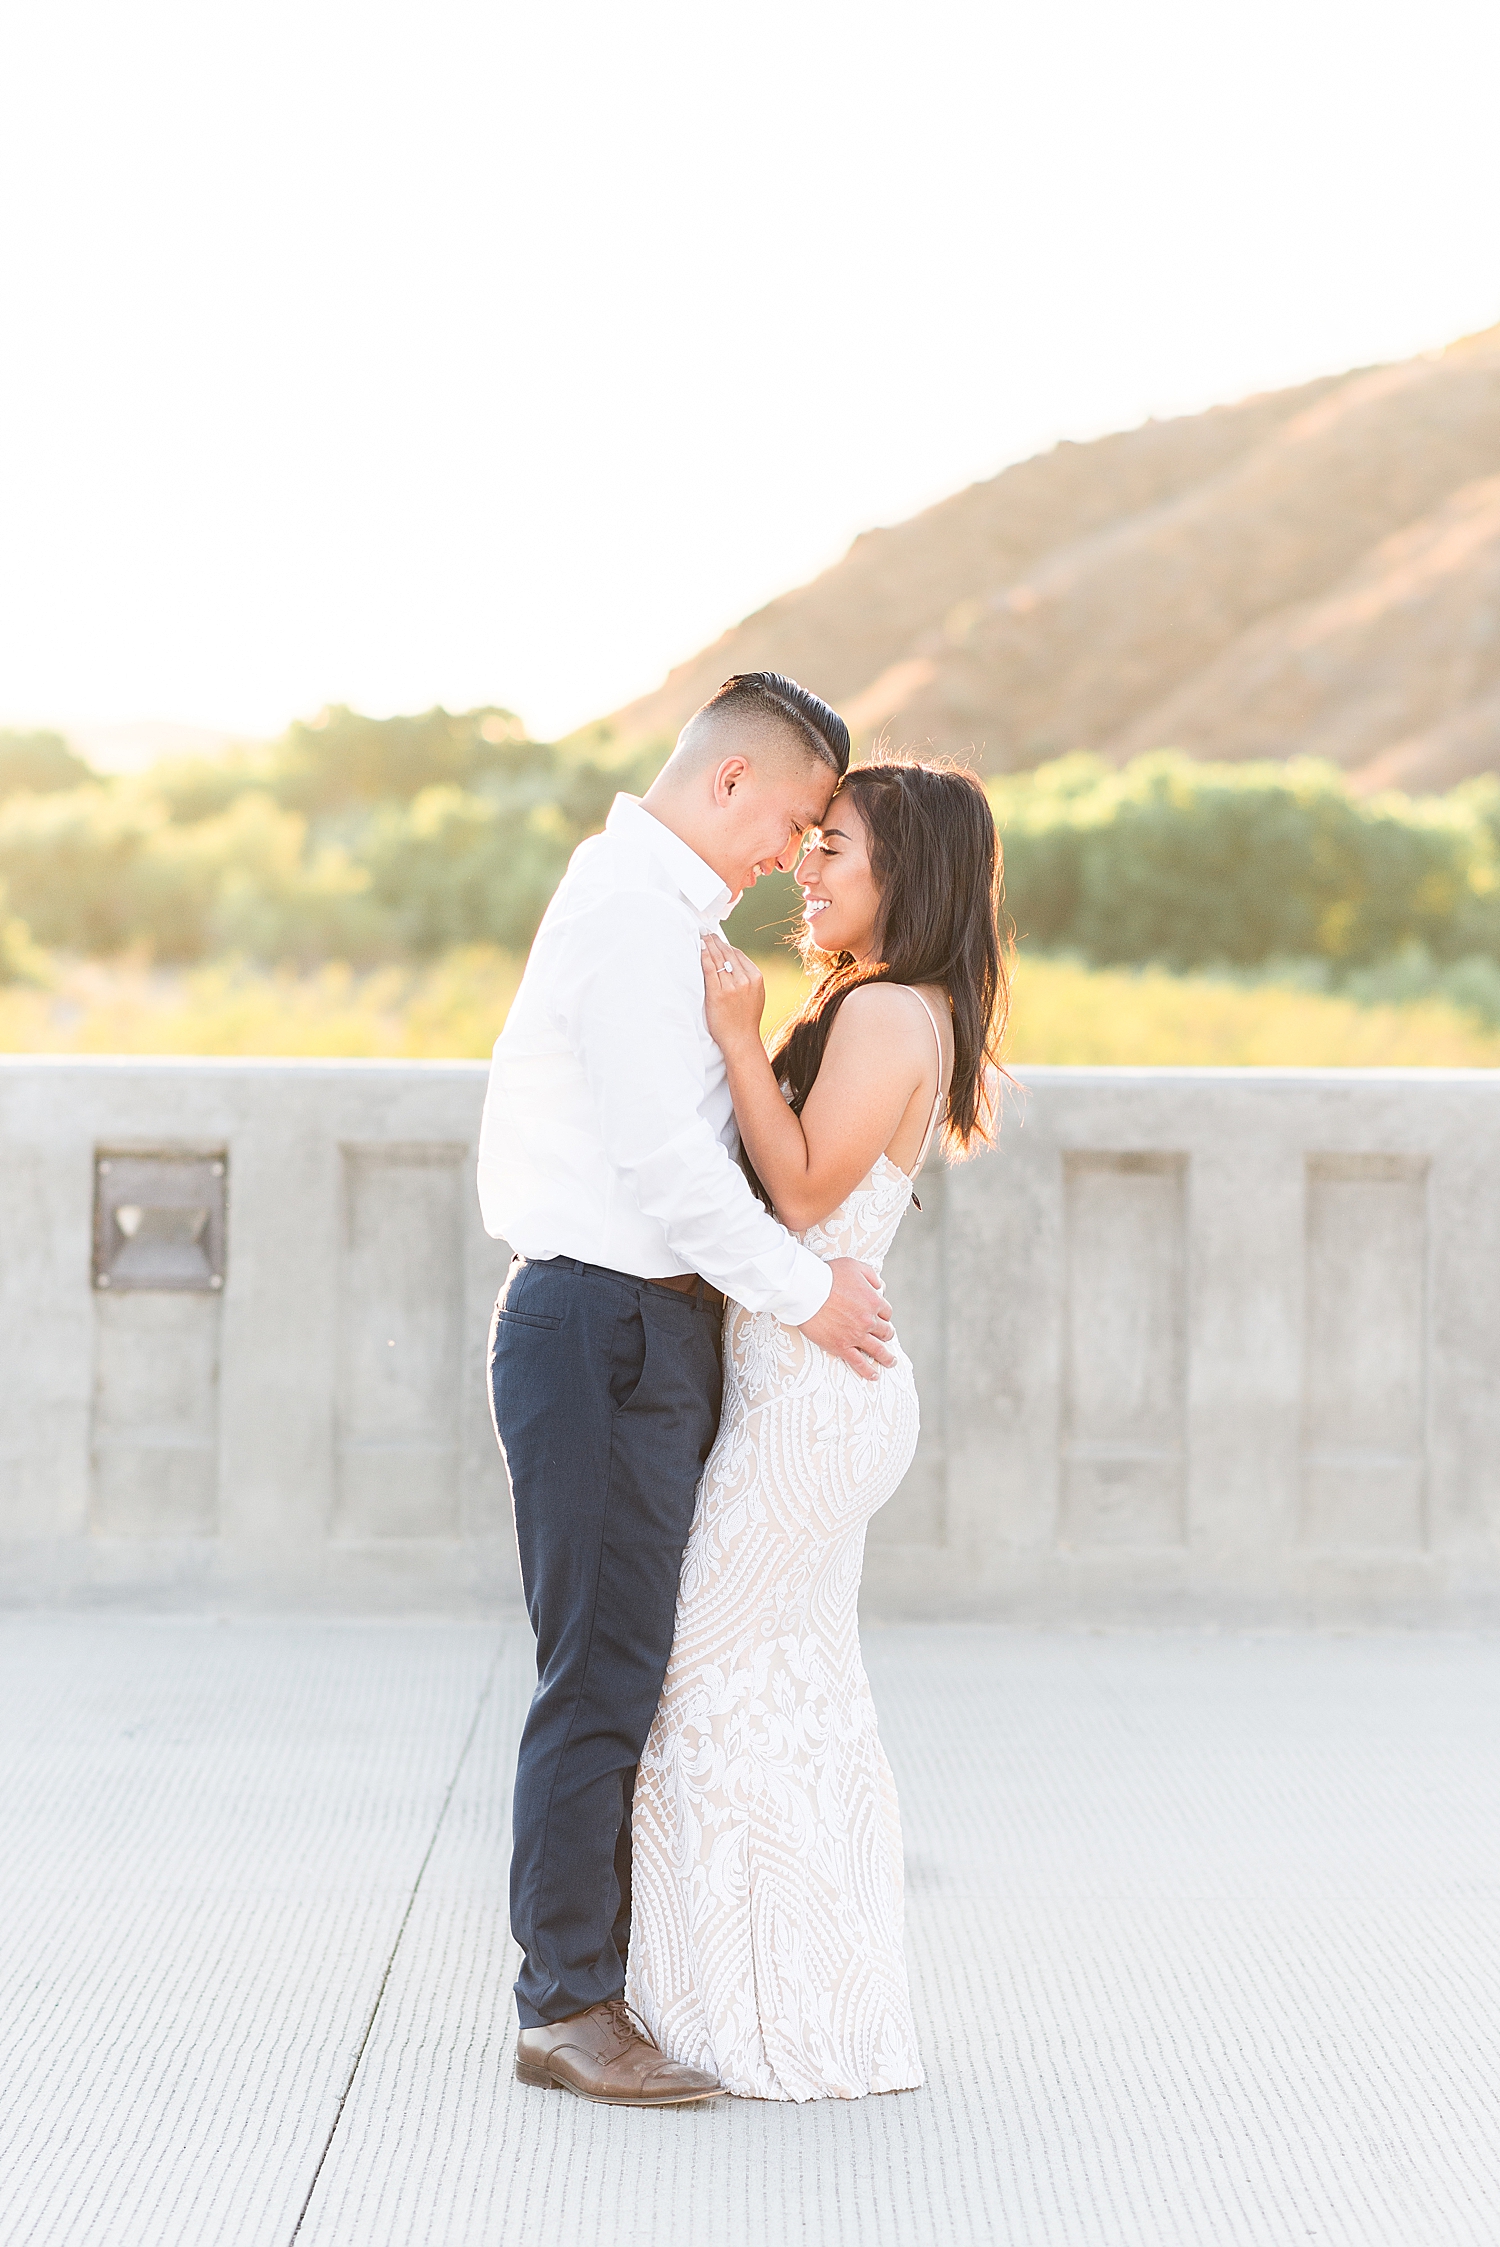 Temecula Engagement Session at sunset with scenic views 